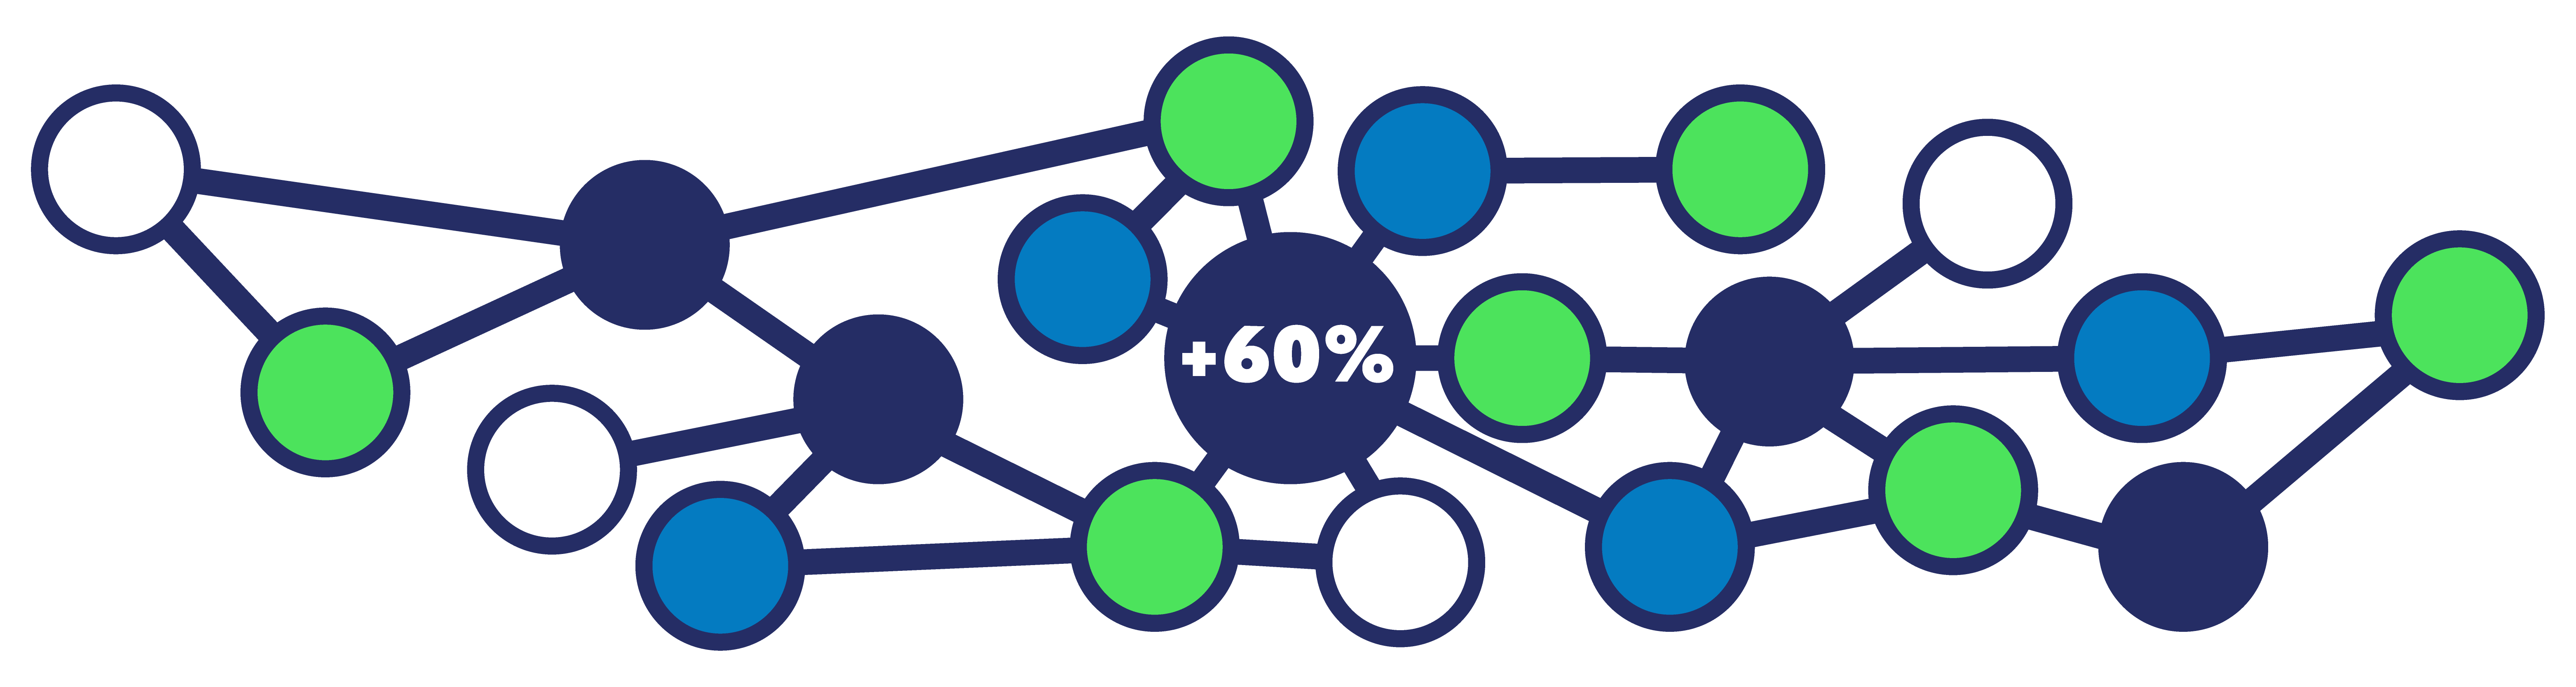 A series of outlined circles in green and blue with a large circle in the center displaying +30% to show 30% growth in the DOBE Network.